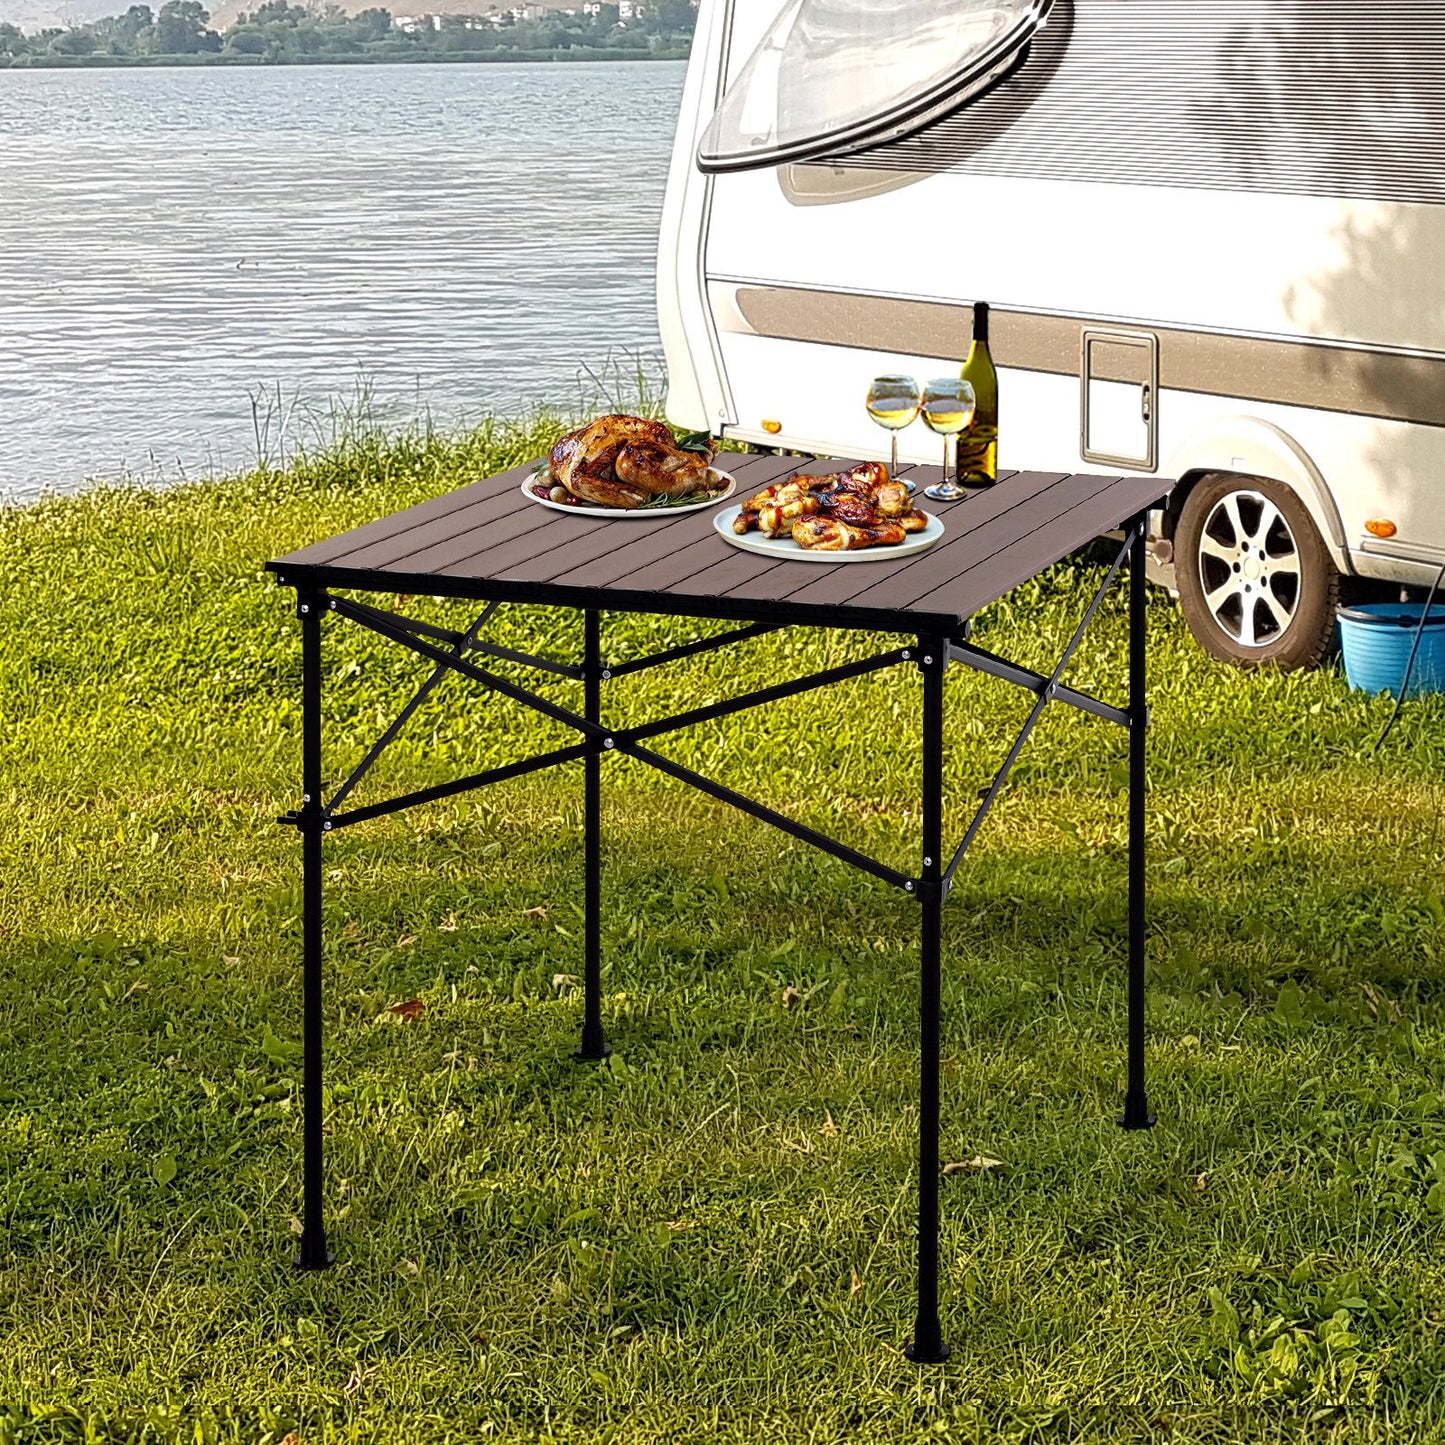 Outsunny Aluminium Folding Picnic Table Portable Camping Table w/ Carrier Bag